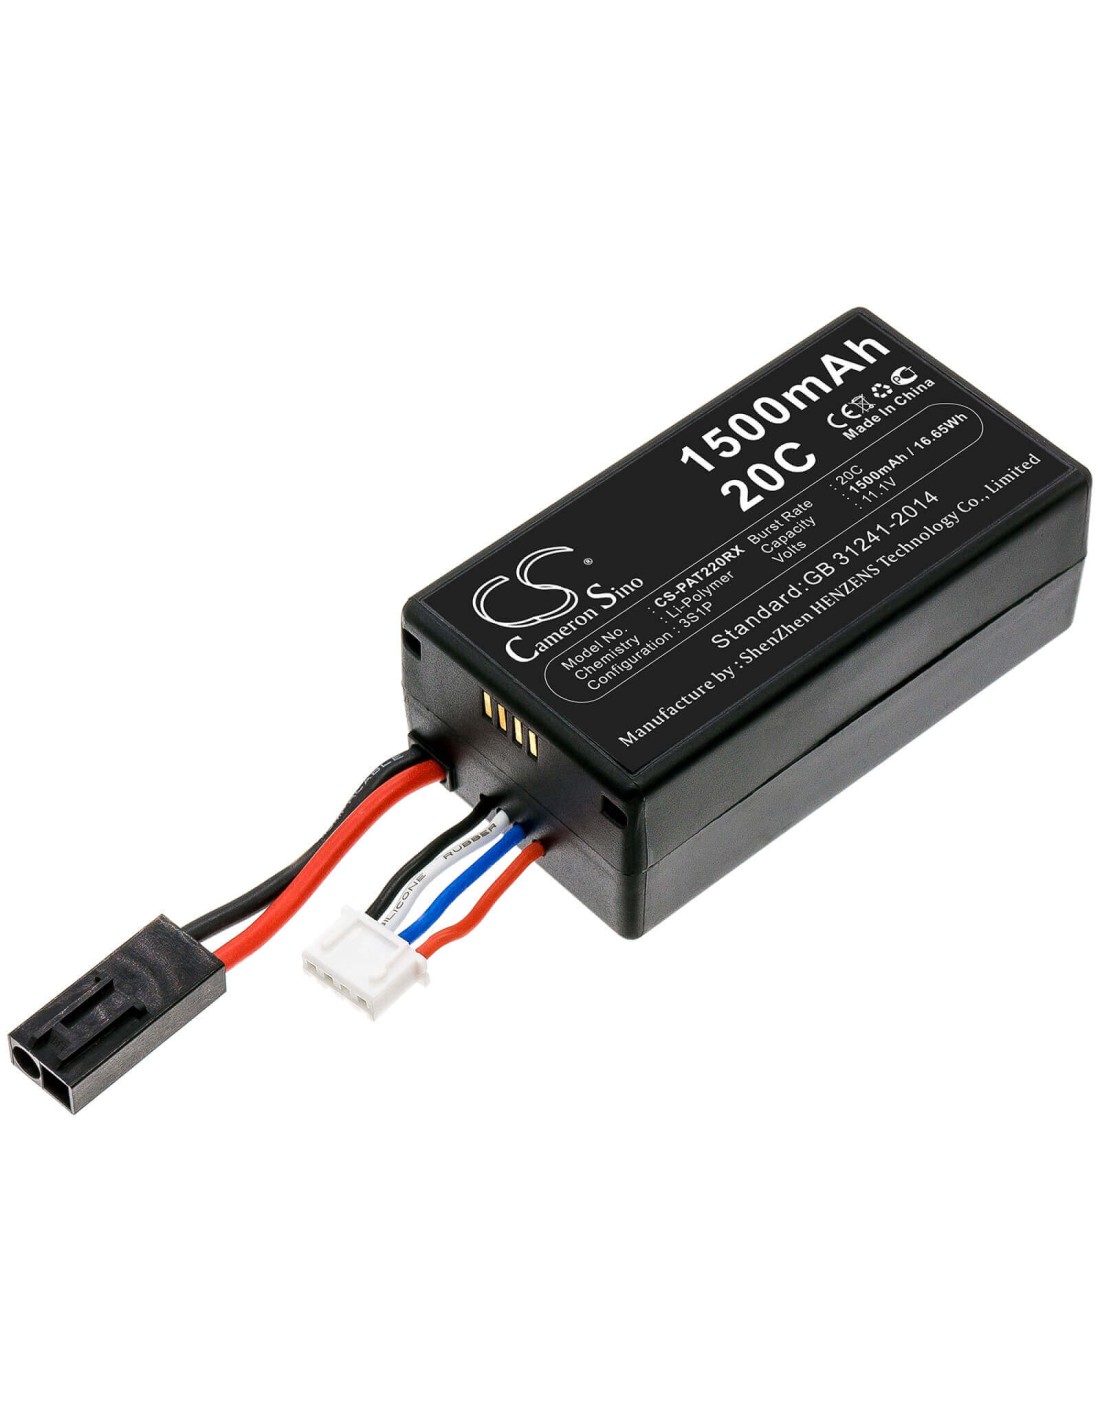 Battery for Parrot, Ar.drone 2.0, Note: Double Plug 11.1V, 1500mAh - 16.65Wh